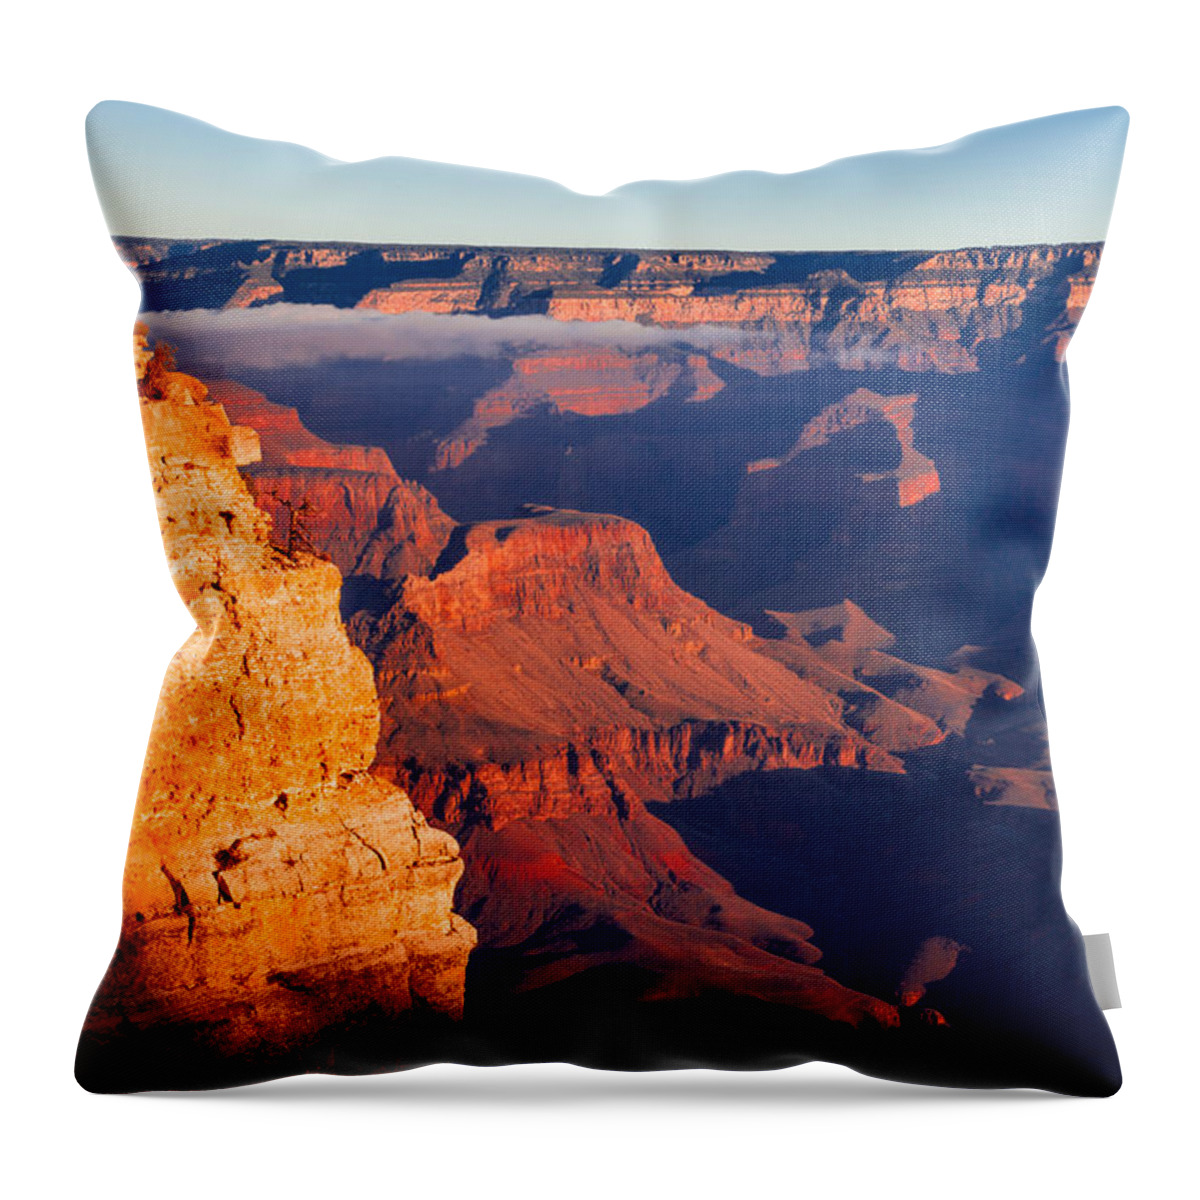 Grand Canyon National Park Throw Pillow featuring the photograph Grand Canyon 35 by Donna Corless